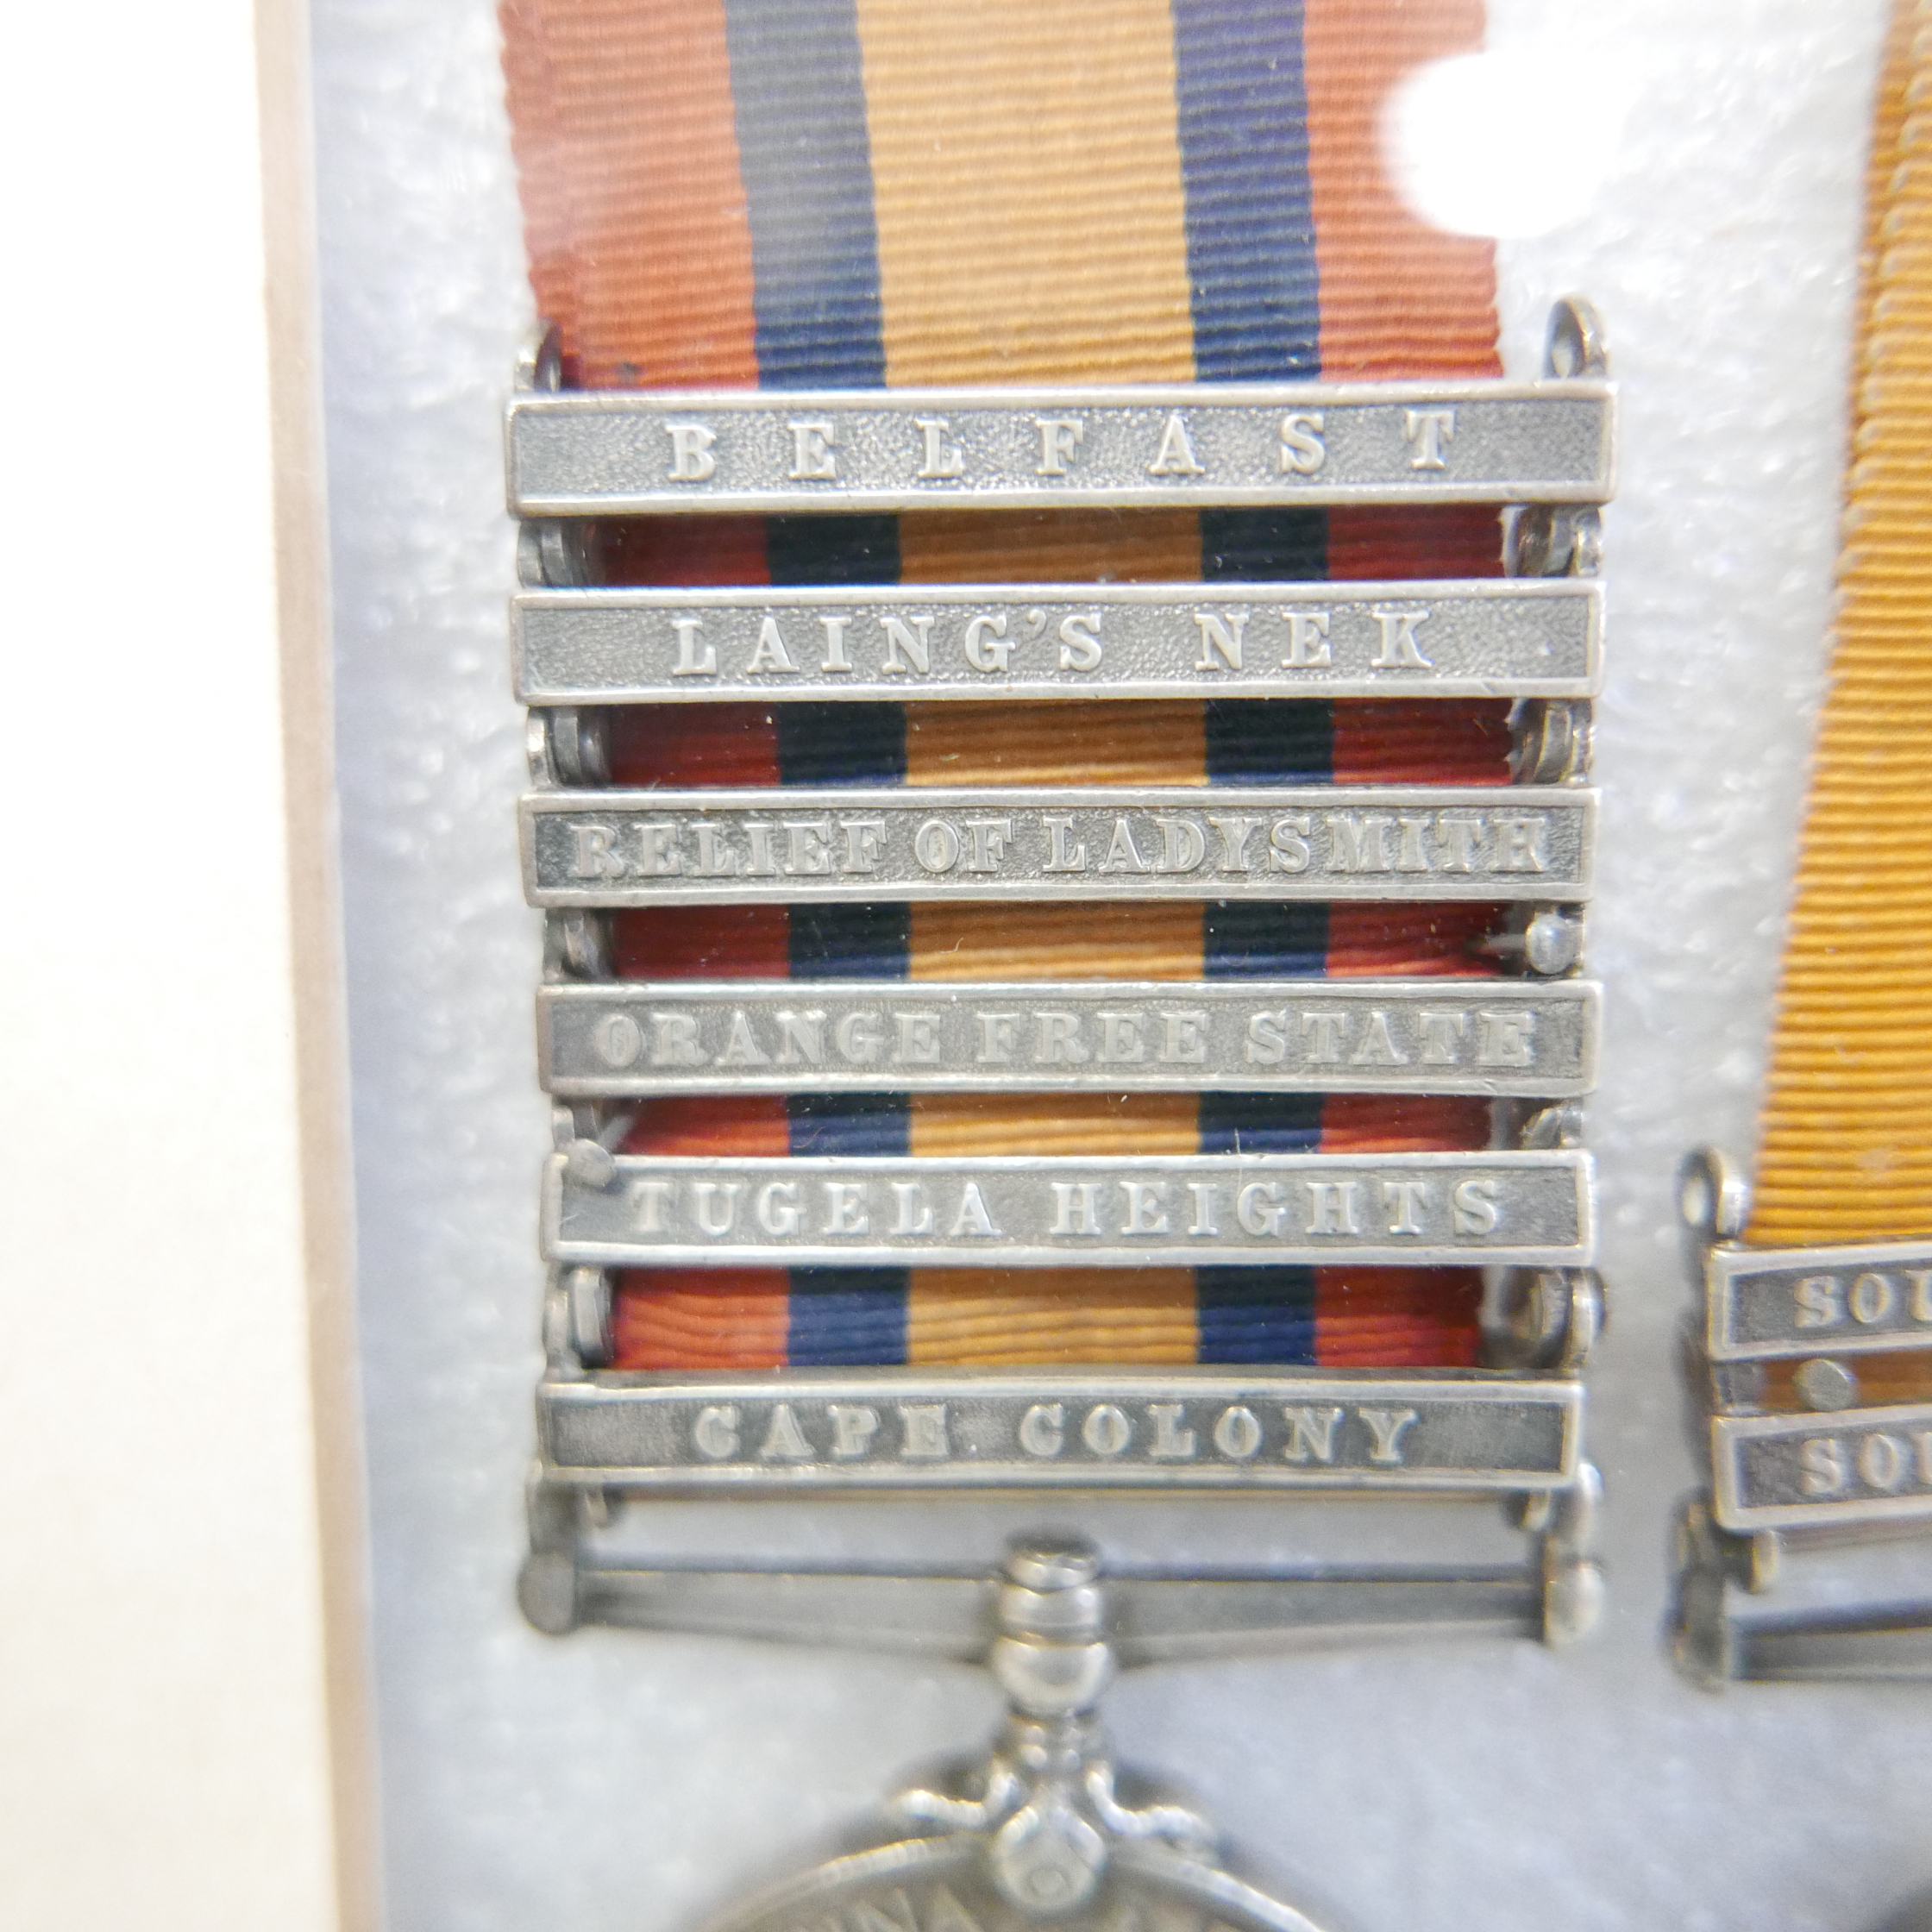 A Queen's South Africa Medal, 6 bars, and a King's South Africa Medal, 2 bars, 13211 Dvr. E. - Image 5 of 7